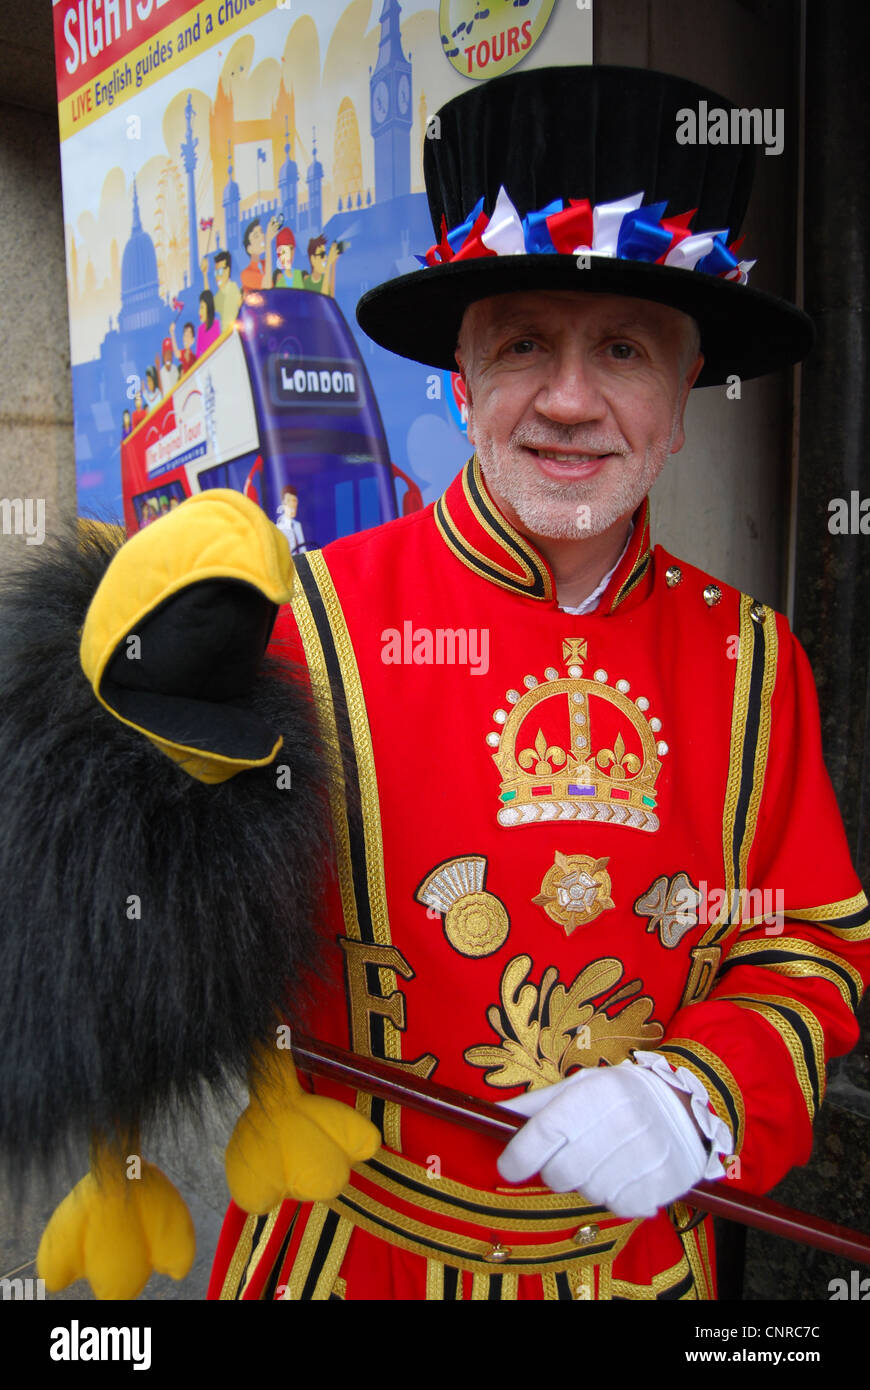 London, Beefeater costume Royal guard at the Tower of London Stock Photo -  Alamy